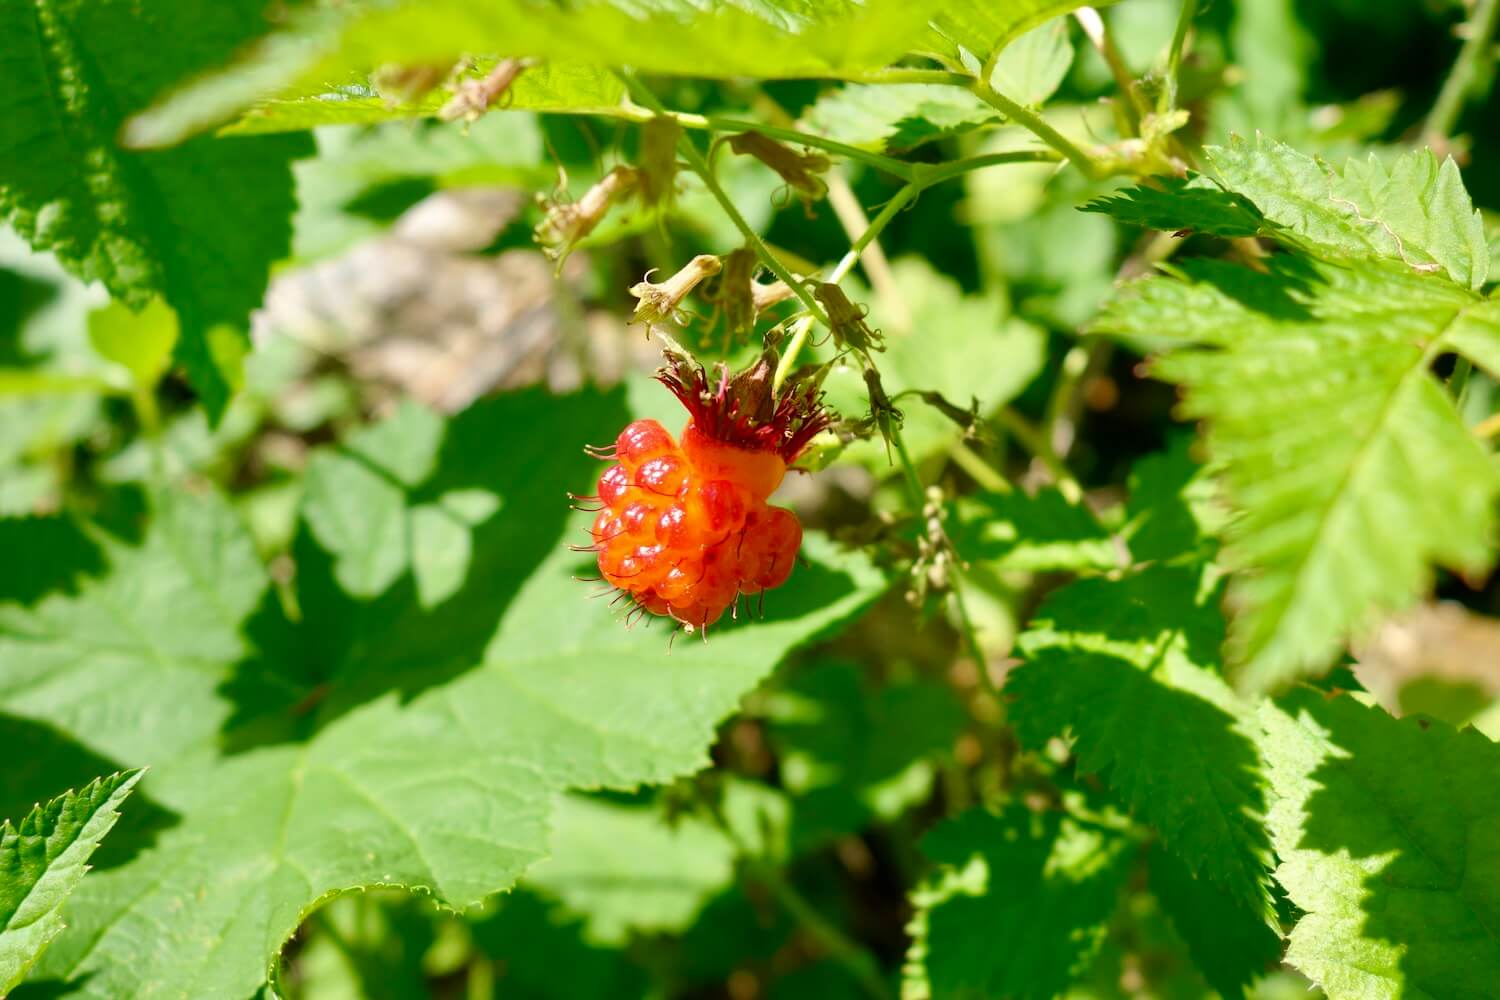 The orangish yellow of the wild raspberry shines in the sunlight amongst the green leafy foliage of the plants, with shadows cast.